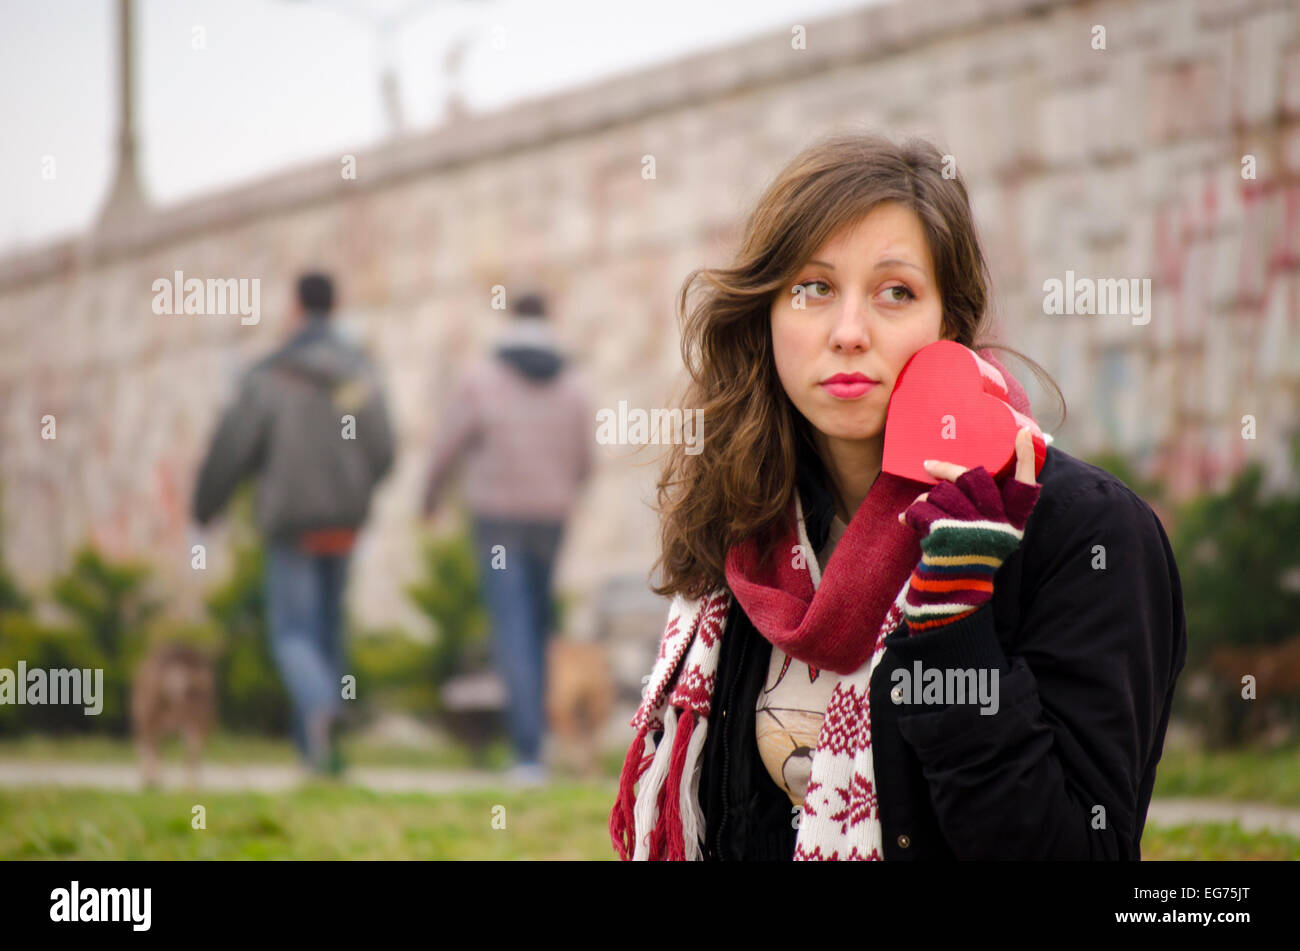 Sad girl alone for Valentine outdoors, Stock Photo